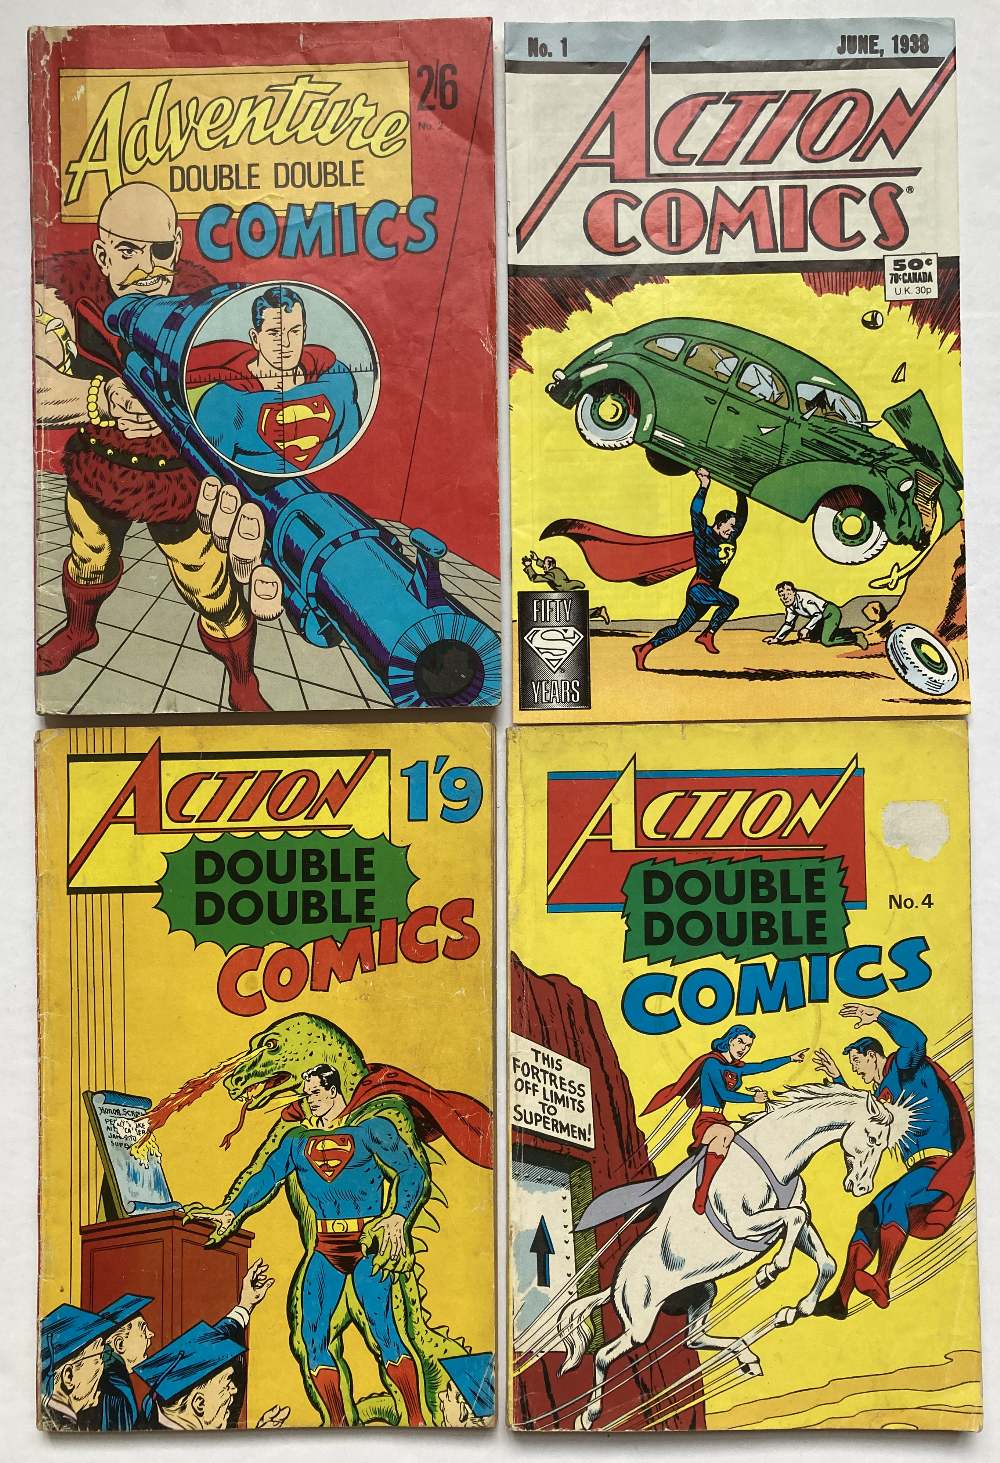 Action Double Double Comics (1970-74) 1, 4. With Adventure Double Double Comics 2 and Action